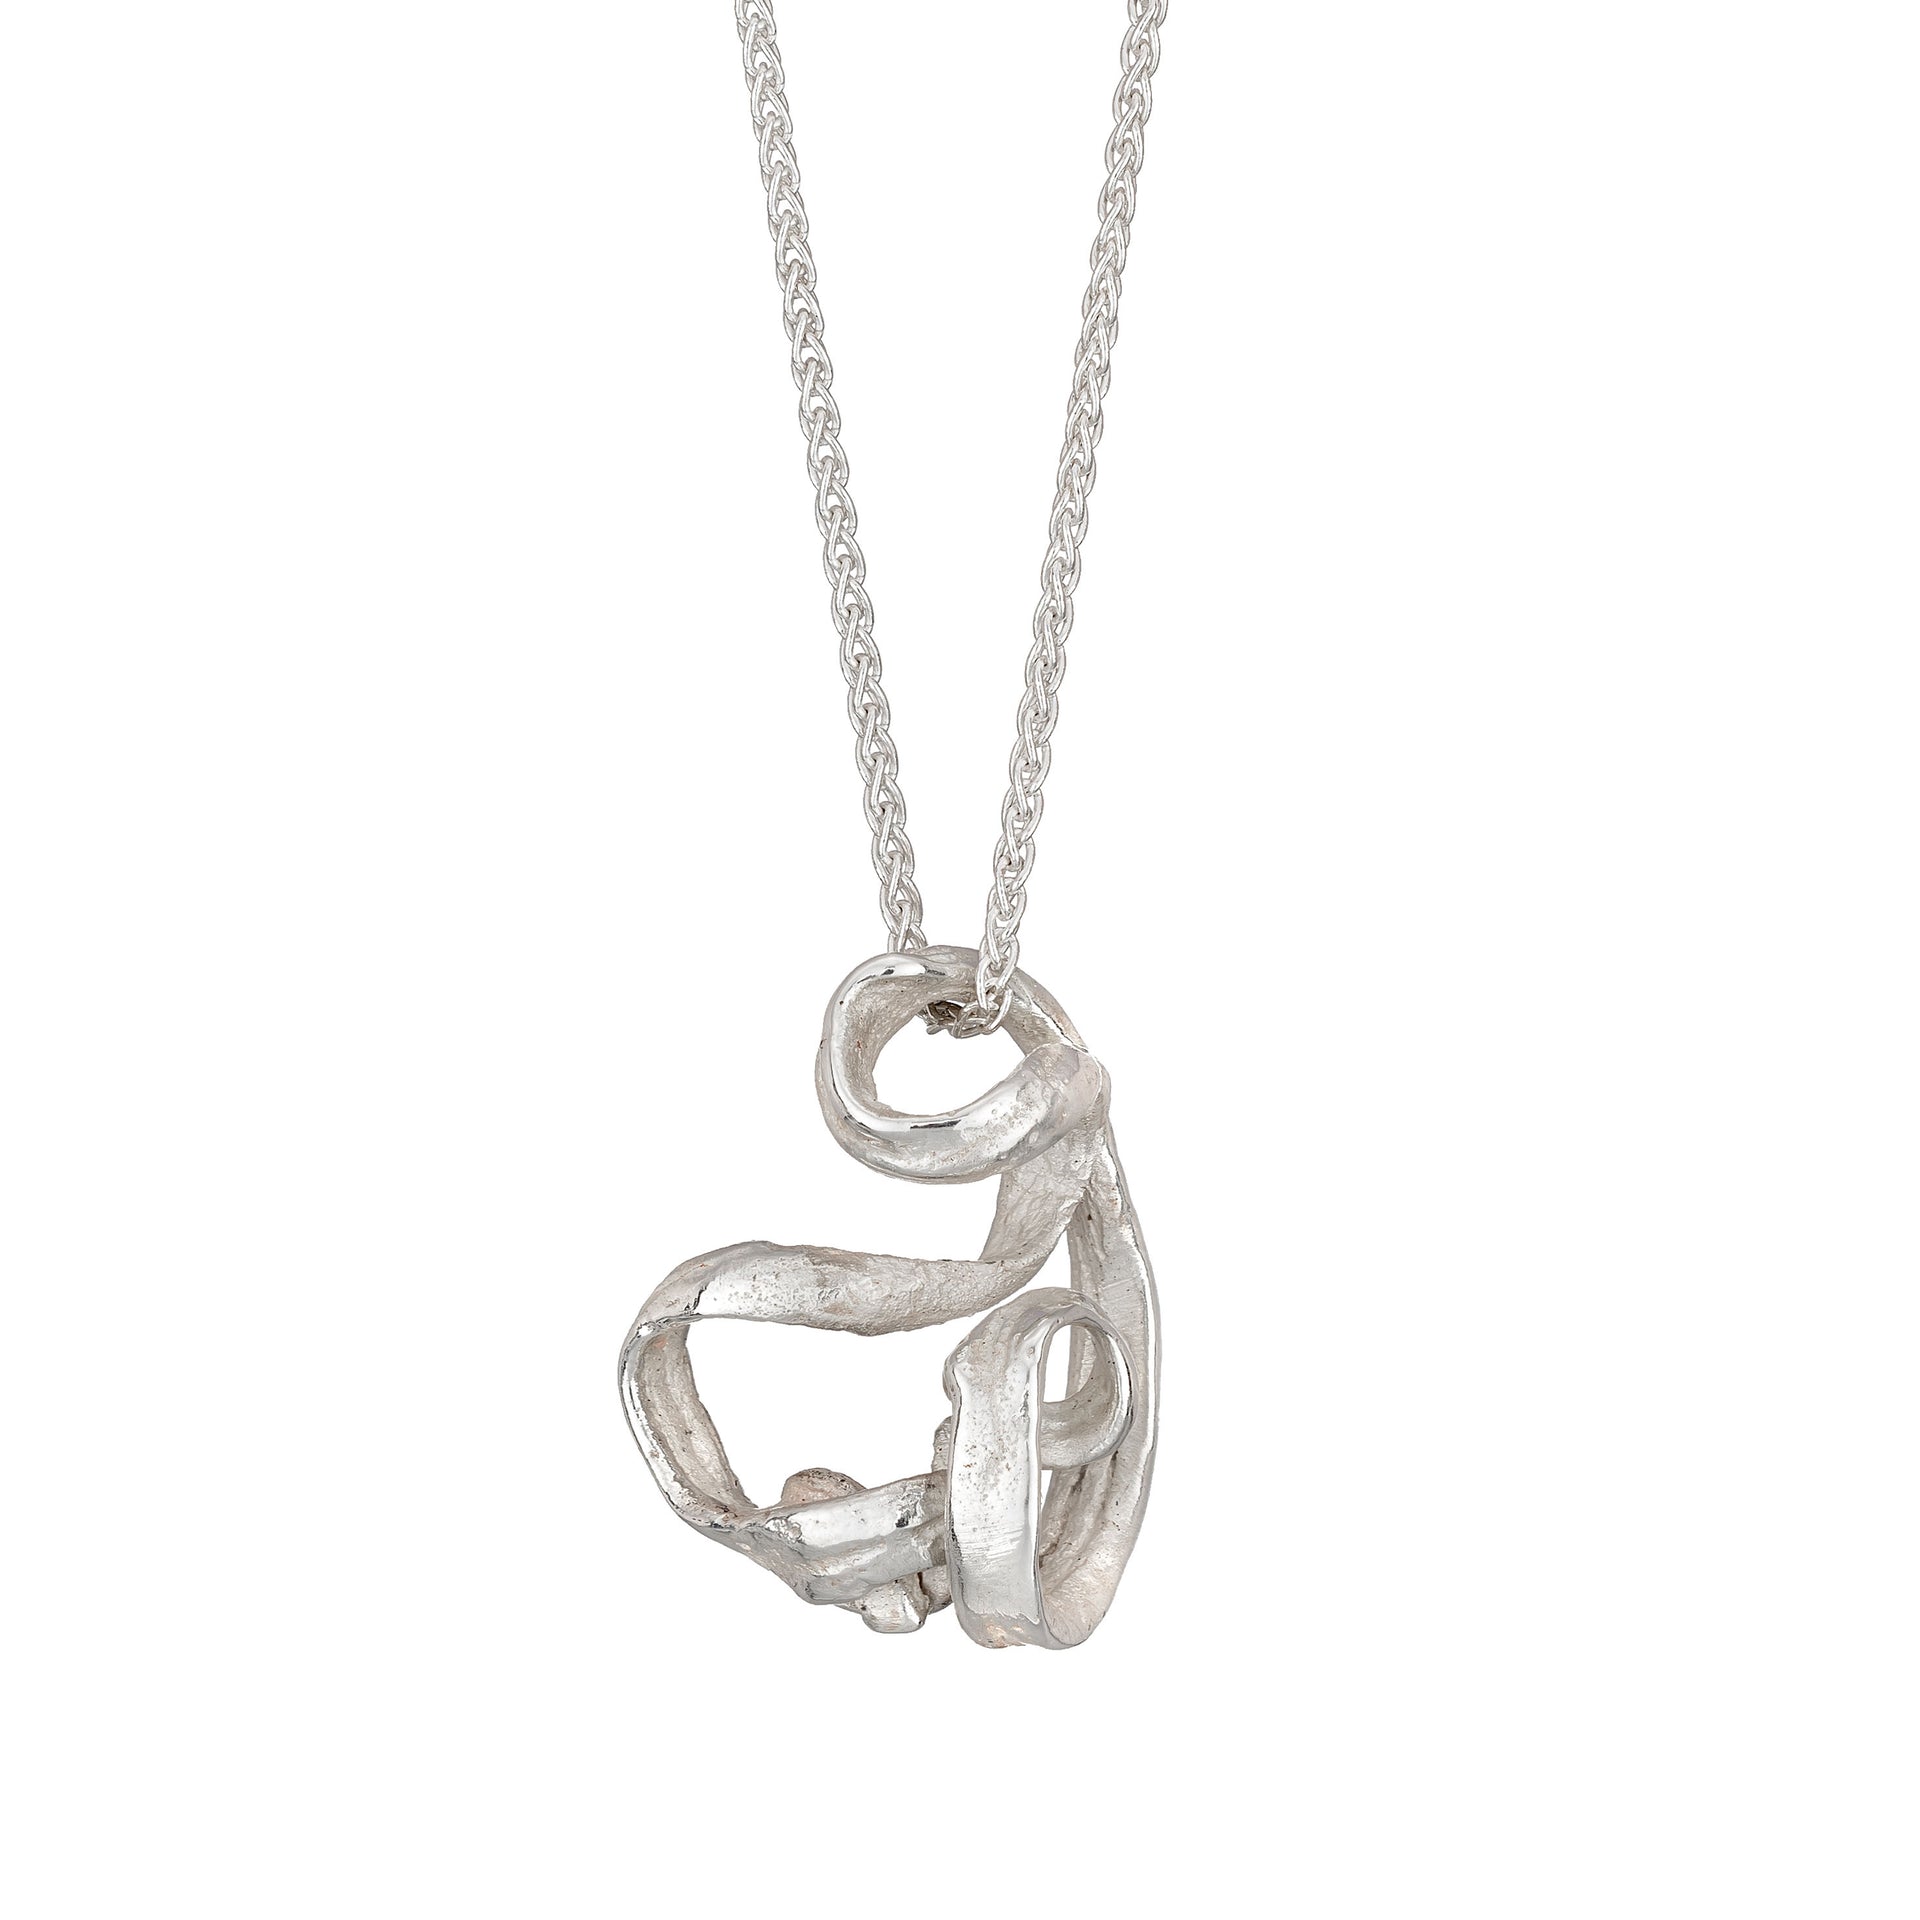 A unique silver pendant design, handcrafted in Cornwall by contemporary jewellery designer Emily Nixon. This simple, sculptural, light weight pendant, moves freely on a fine sterling silver chain. The fine twist of silver hangs in an organic twisting furl just below the collar bone. Beautifully handmade, the finish is under polished to retain a deliberately matte, whitish silver finish.